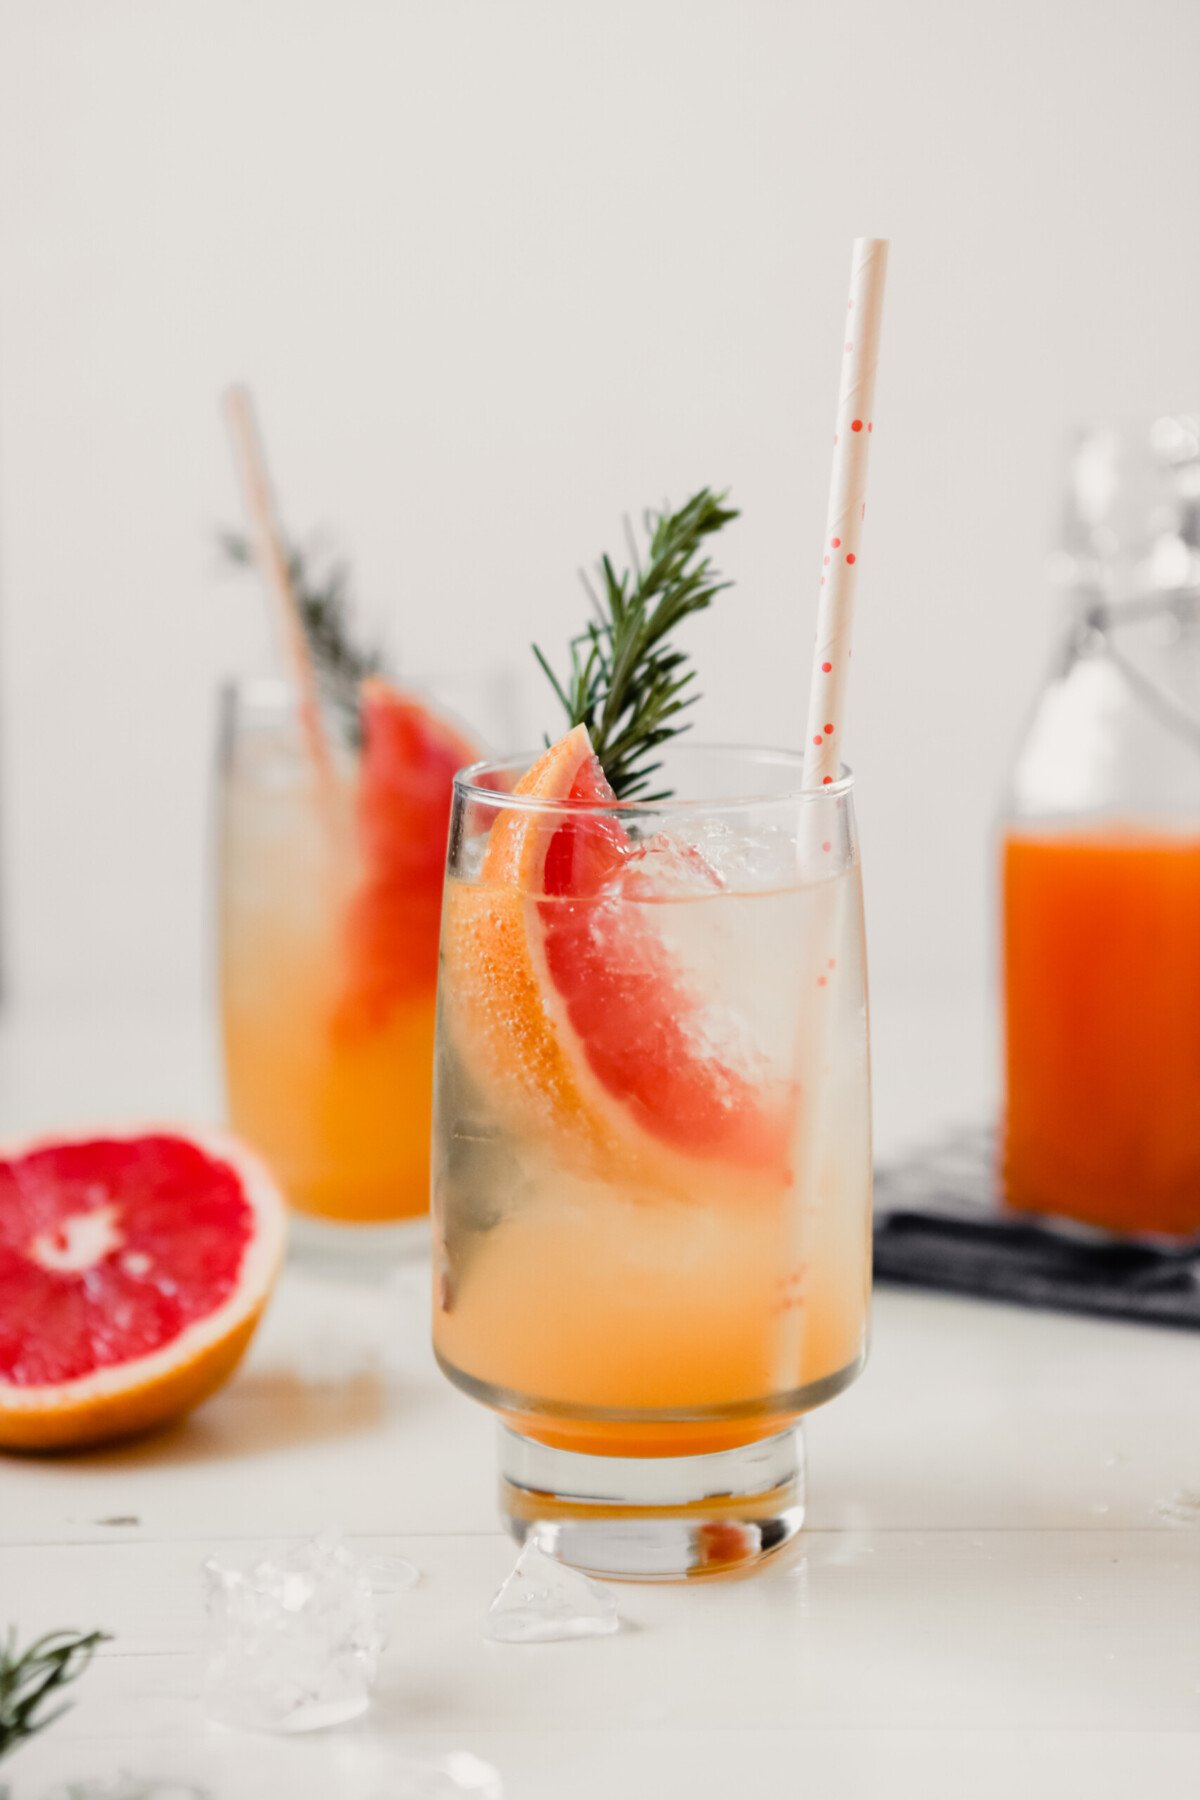 Photograph of a homemade grapefruit soda with a grapefruit slice, sprig of rosemary and white straw